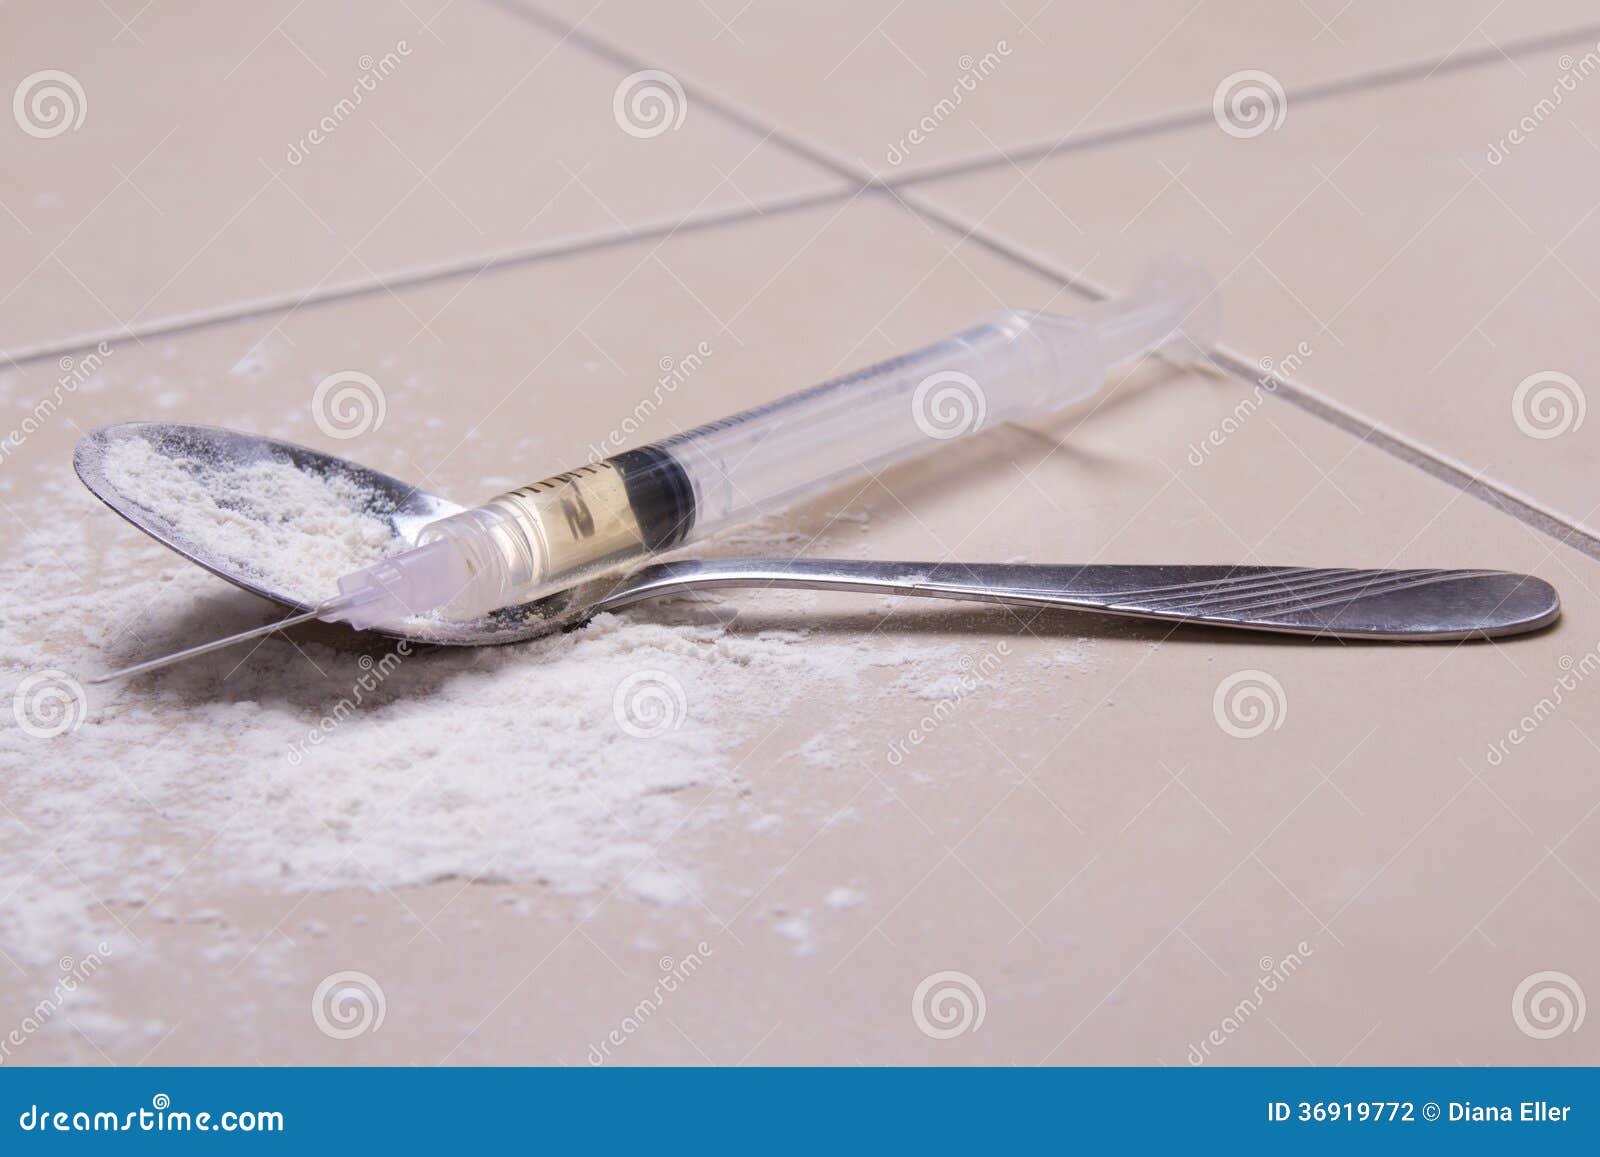 Syringe With Drug Substance, Heroin Powder And Spoon Stock ...